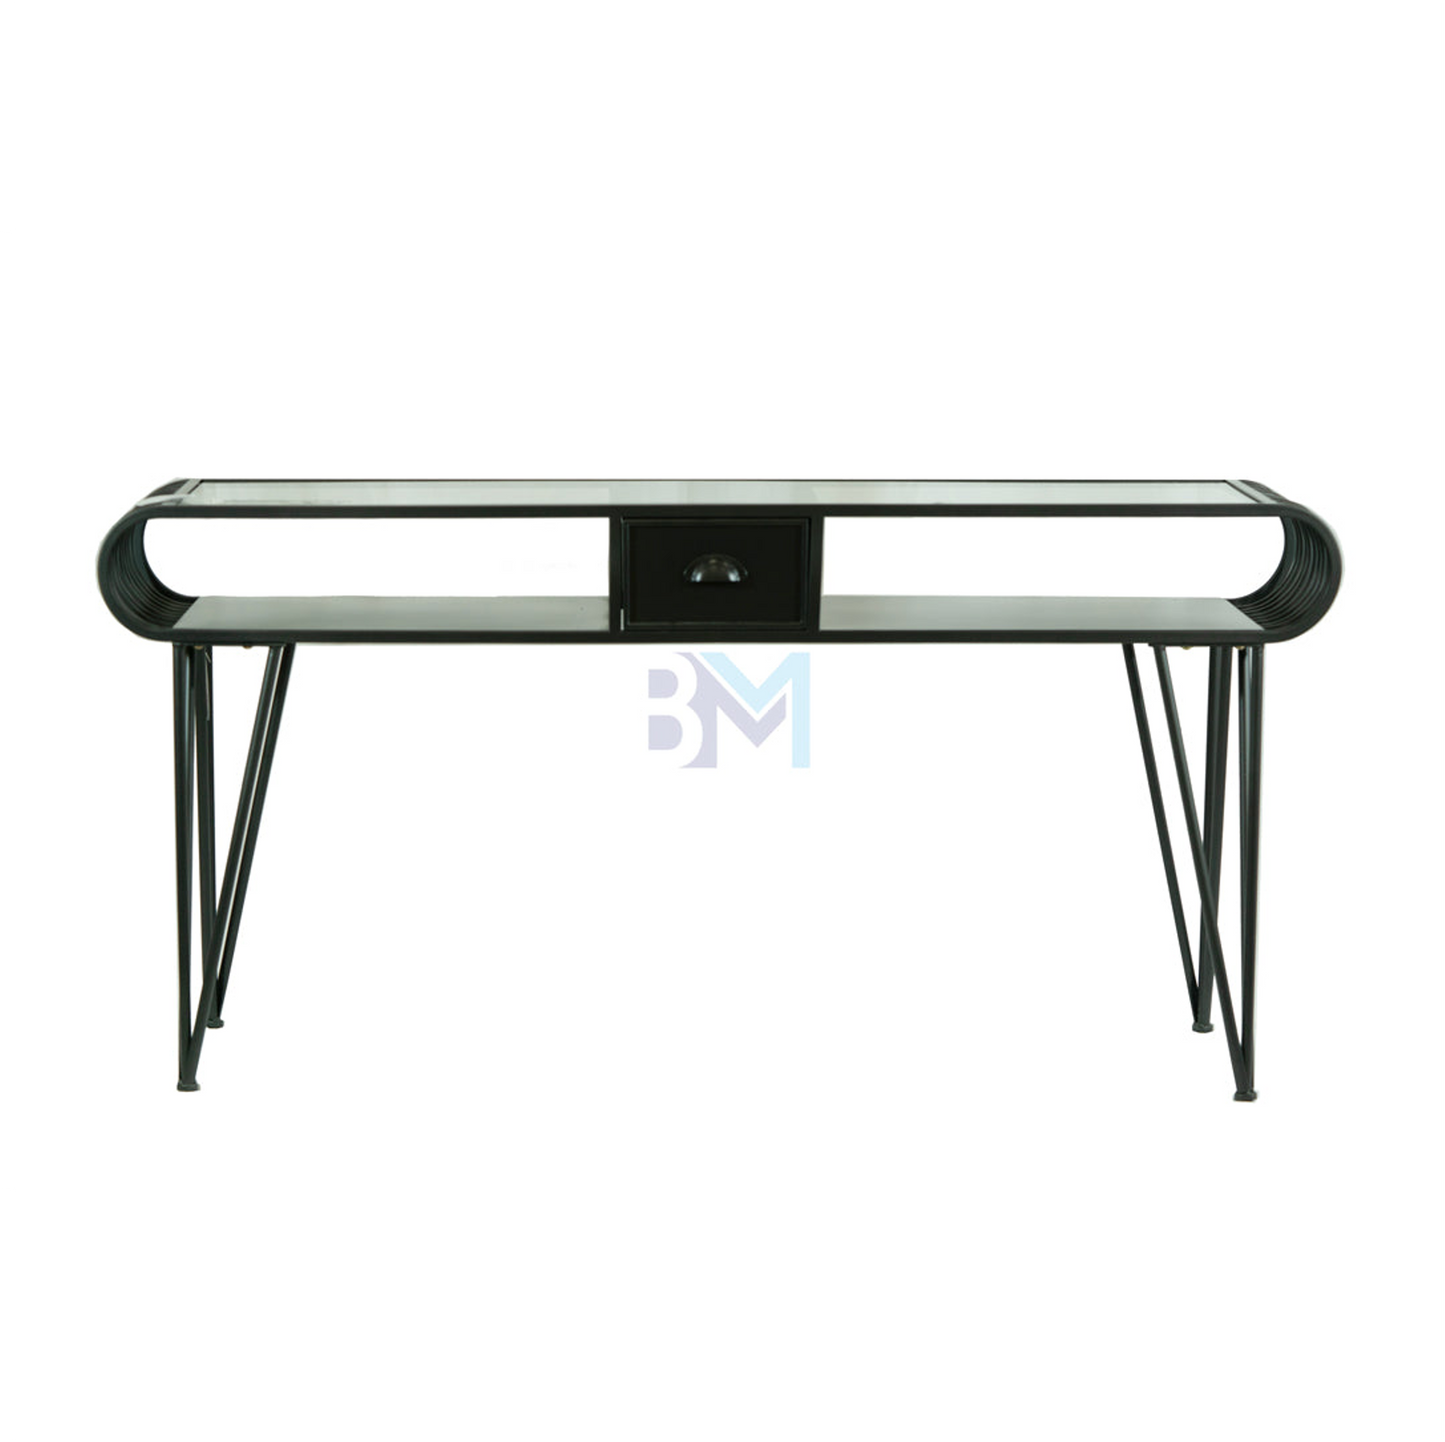 Double manicure table in black metal with drawers and glass